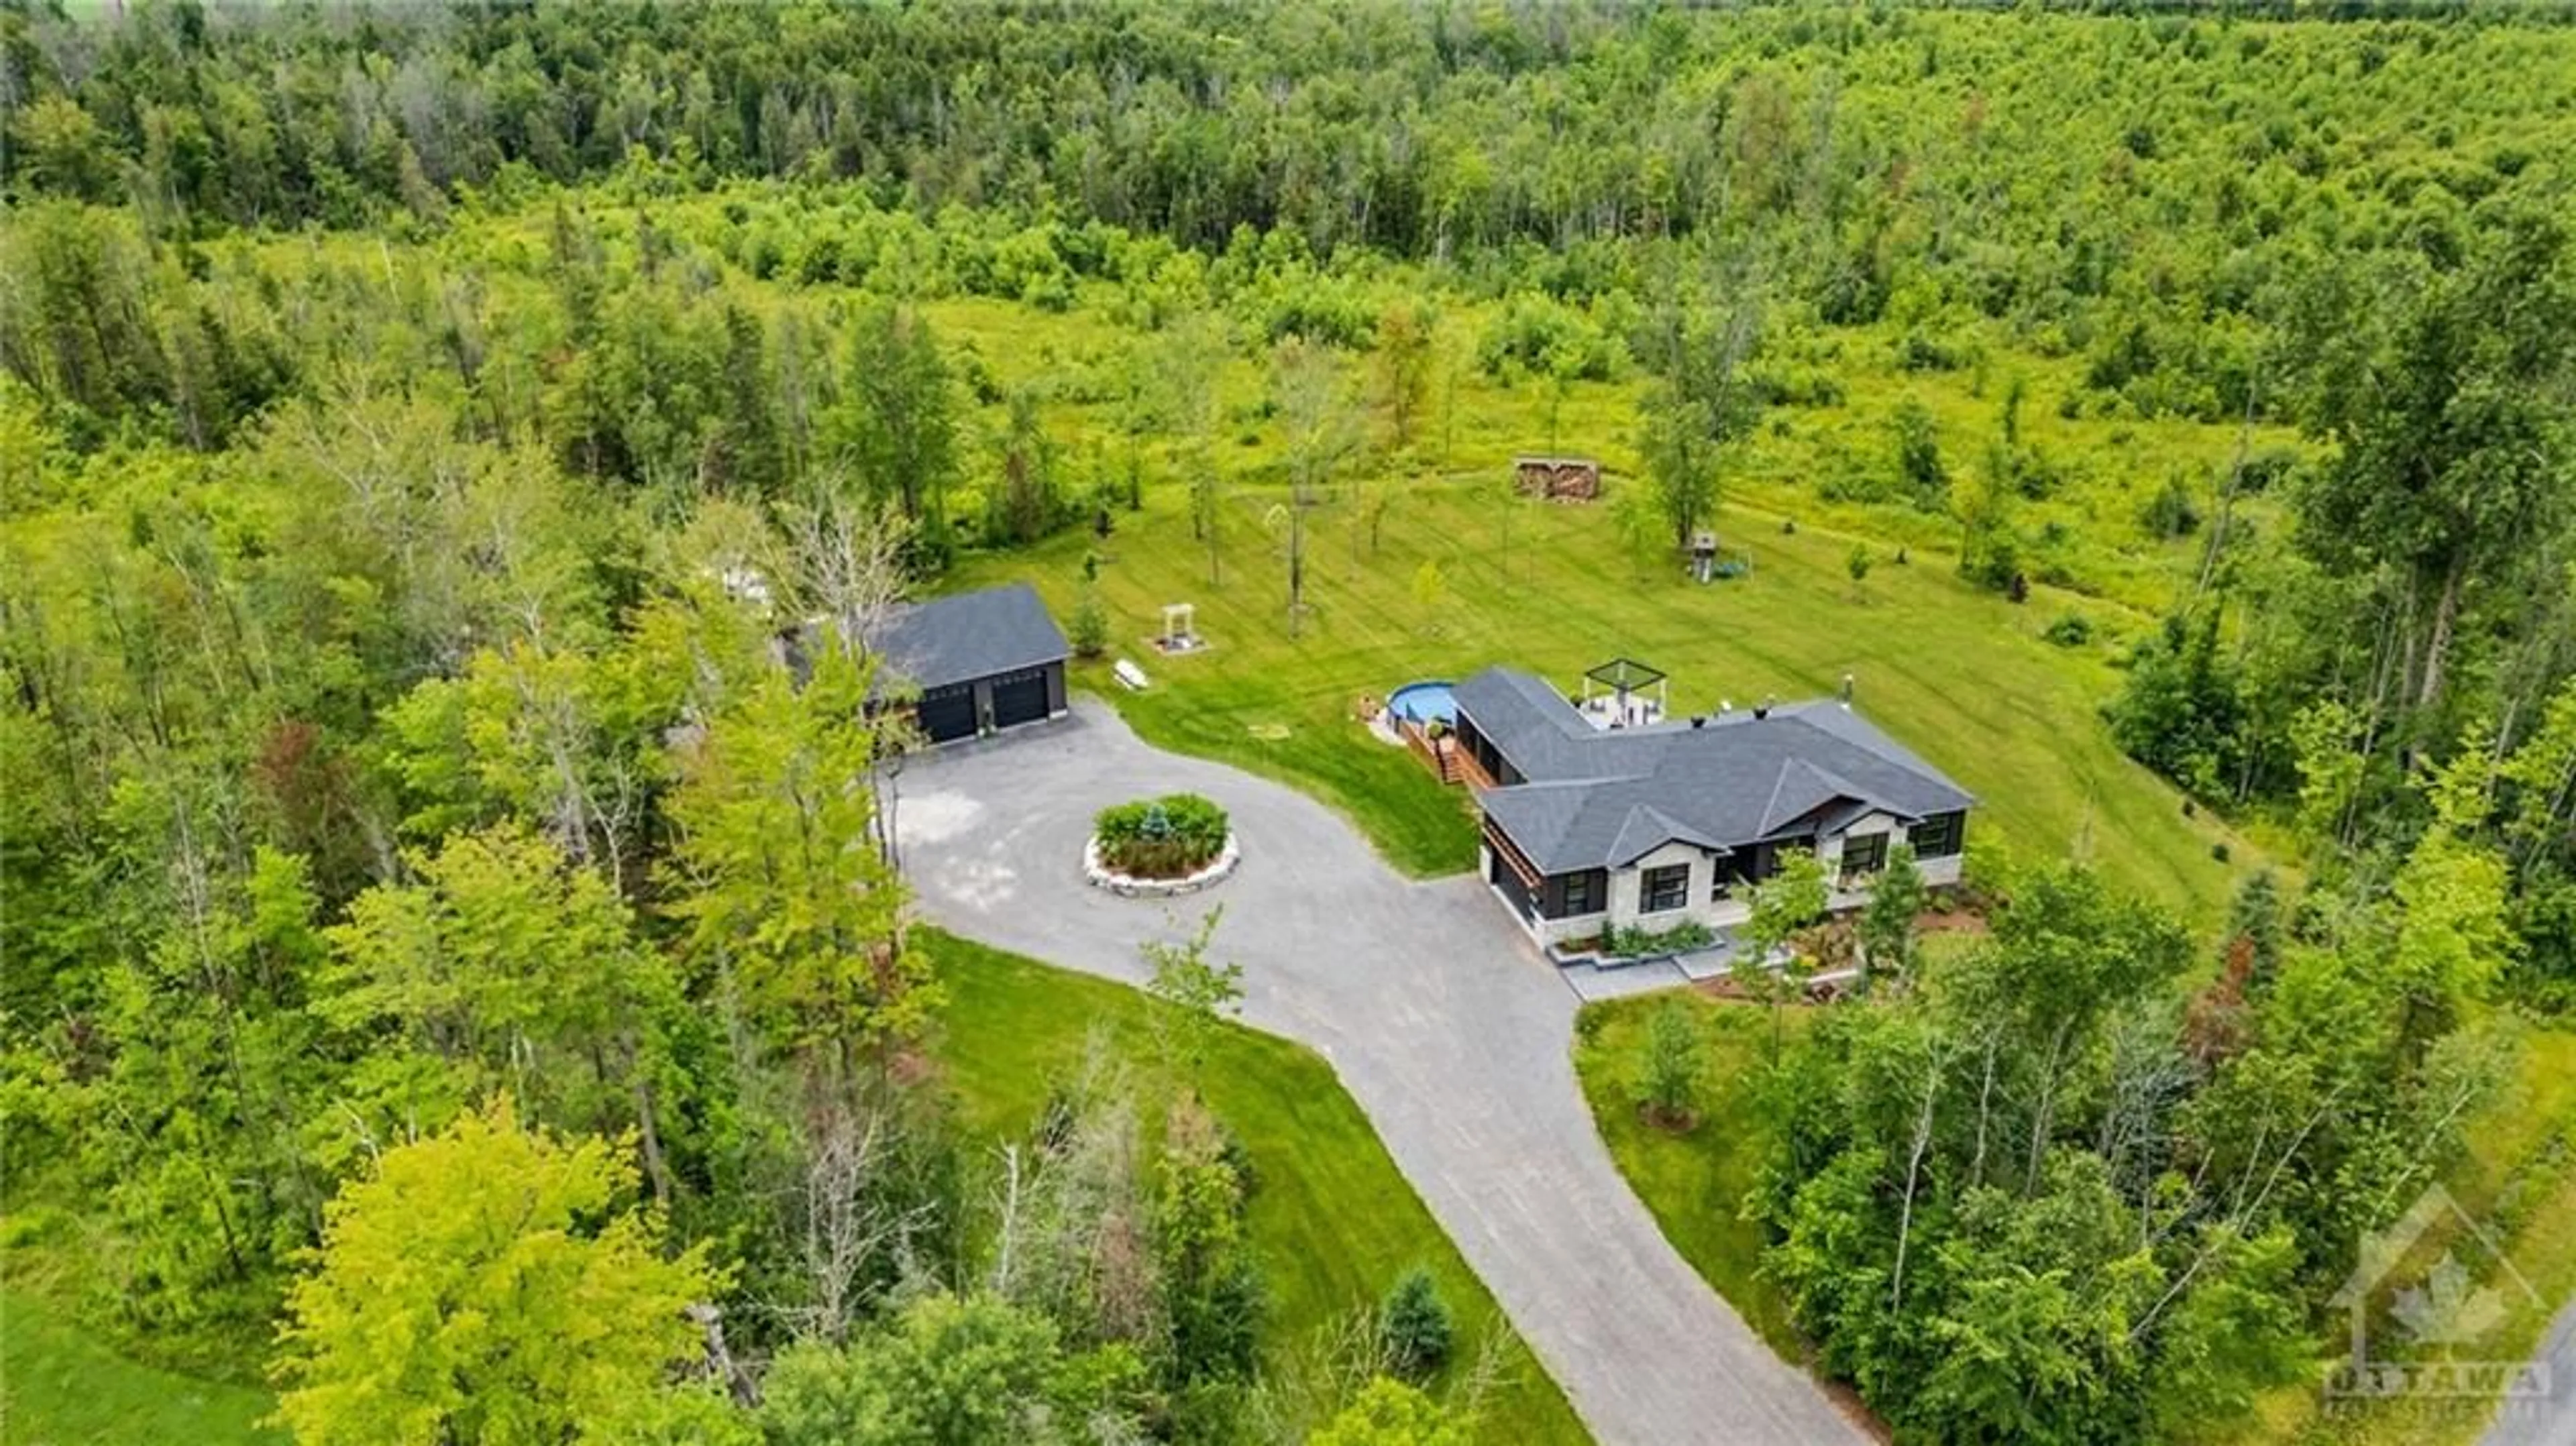 Cottage for 10430 SHAW Rd, Mountain Ontario K0E 1S0